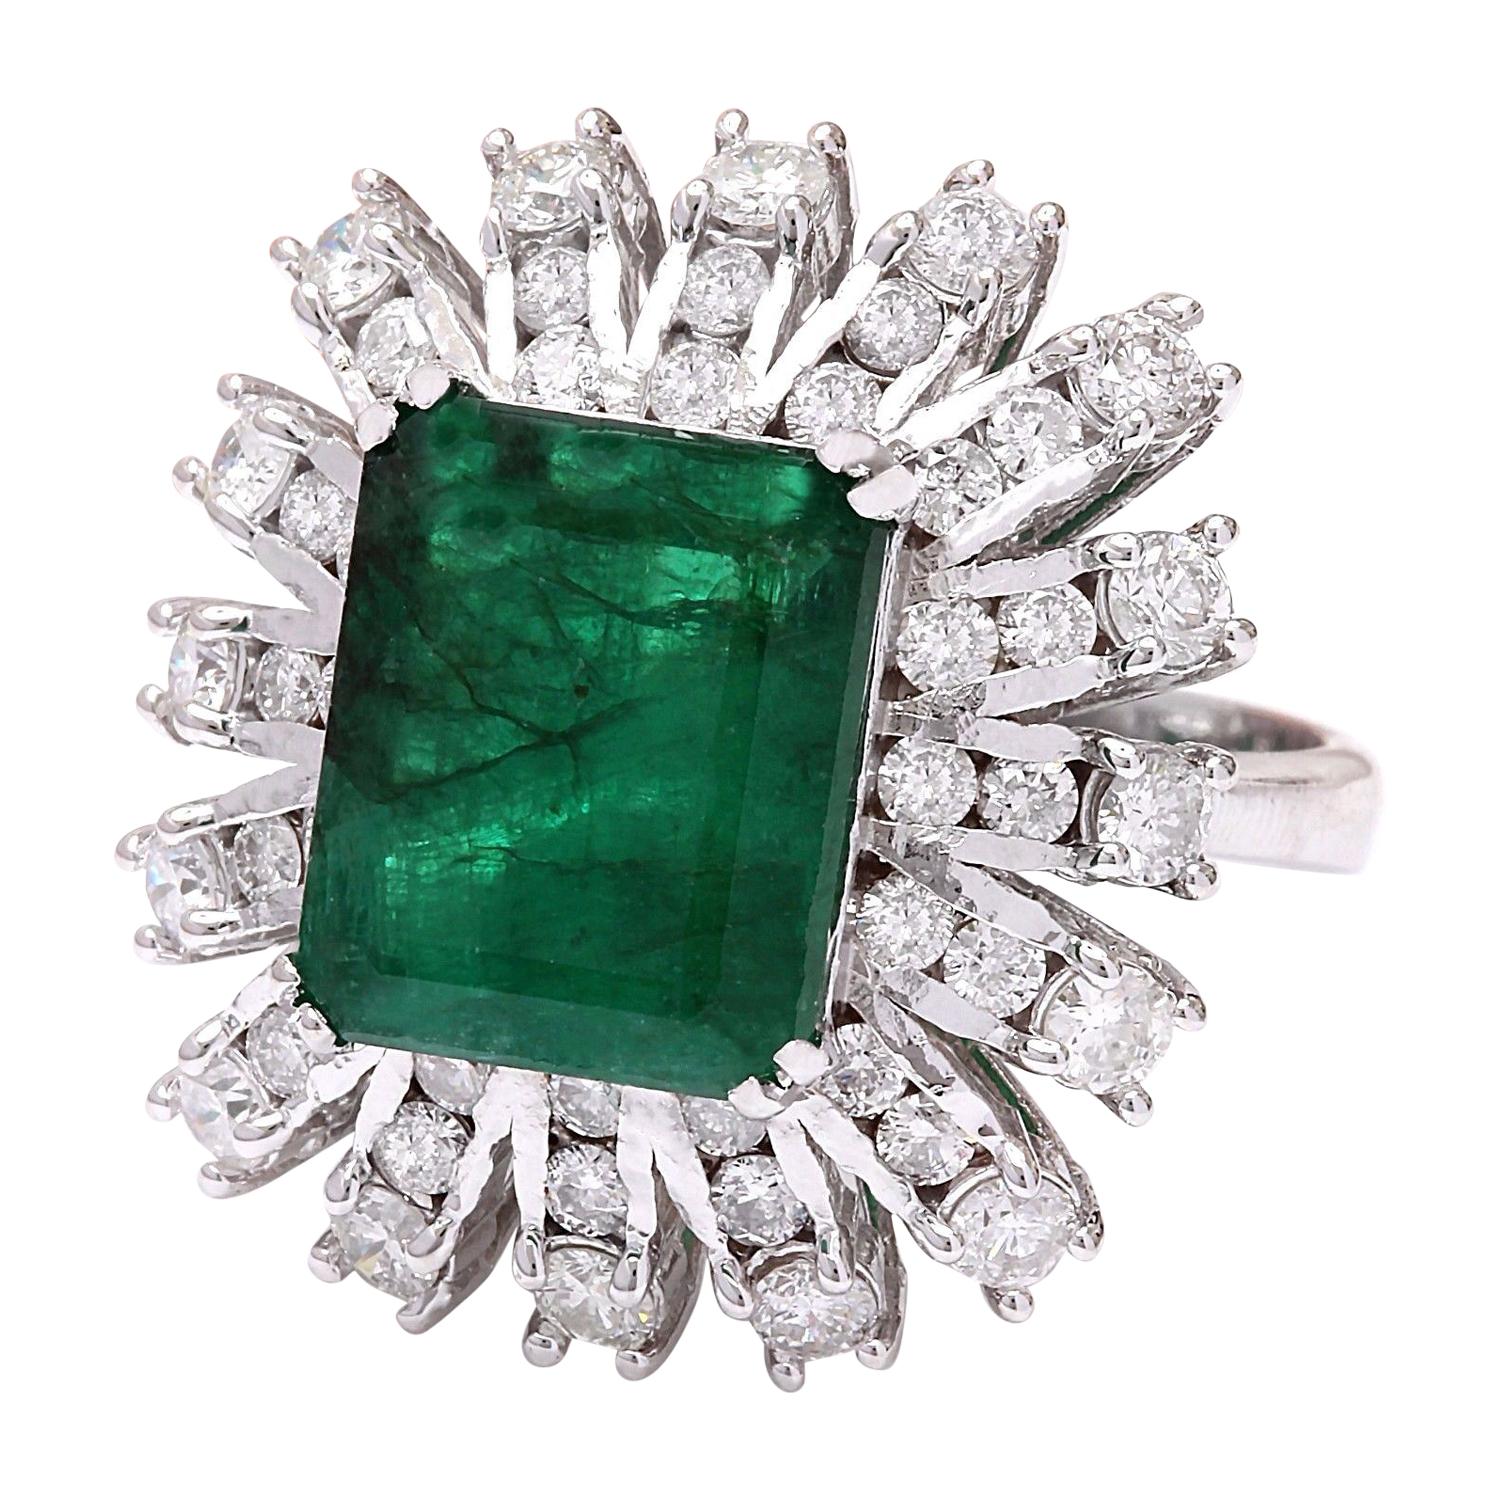 Introducing our stunning 14K Solid White Gold Diamond Ring, adorned with a captivating 7.60 Carat Emerald as its centerpiece. Meticulously crafted from luxurious 14K white gold, this ring boasts a total metal weight of 7 grams, ensuring both